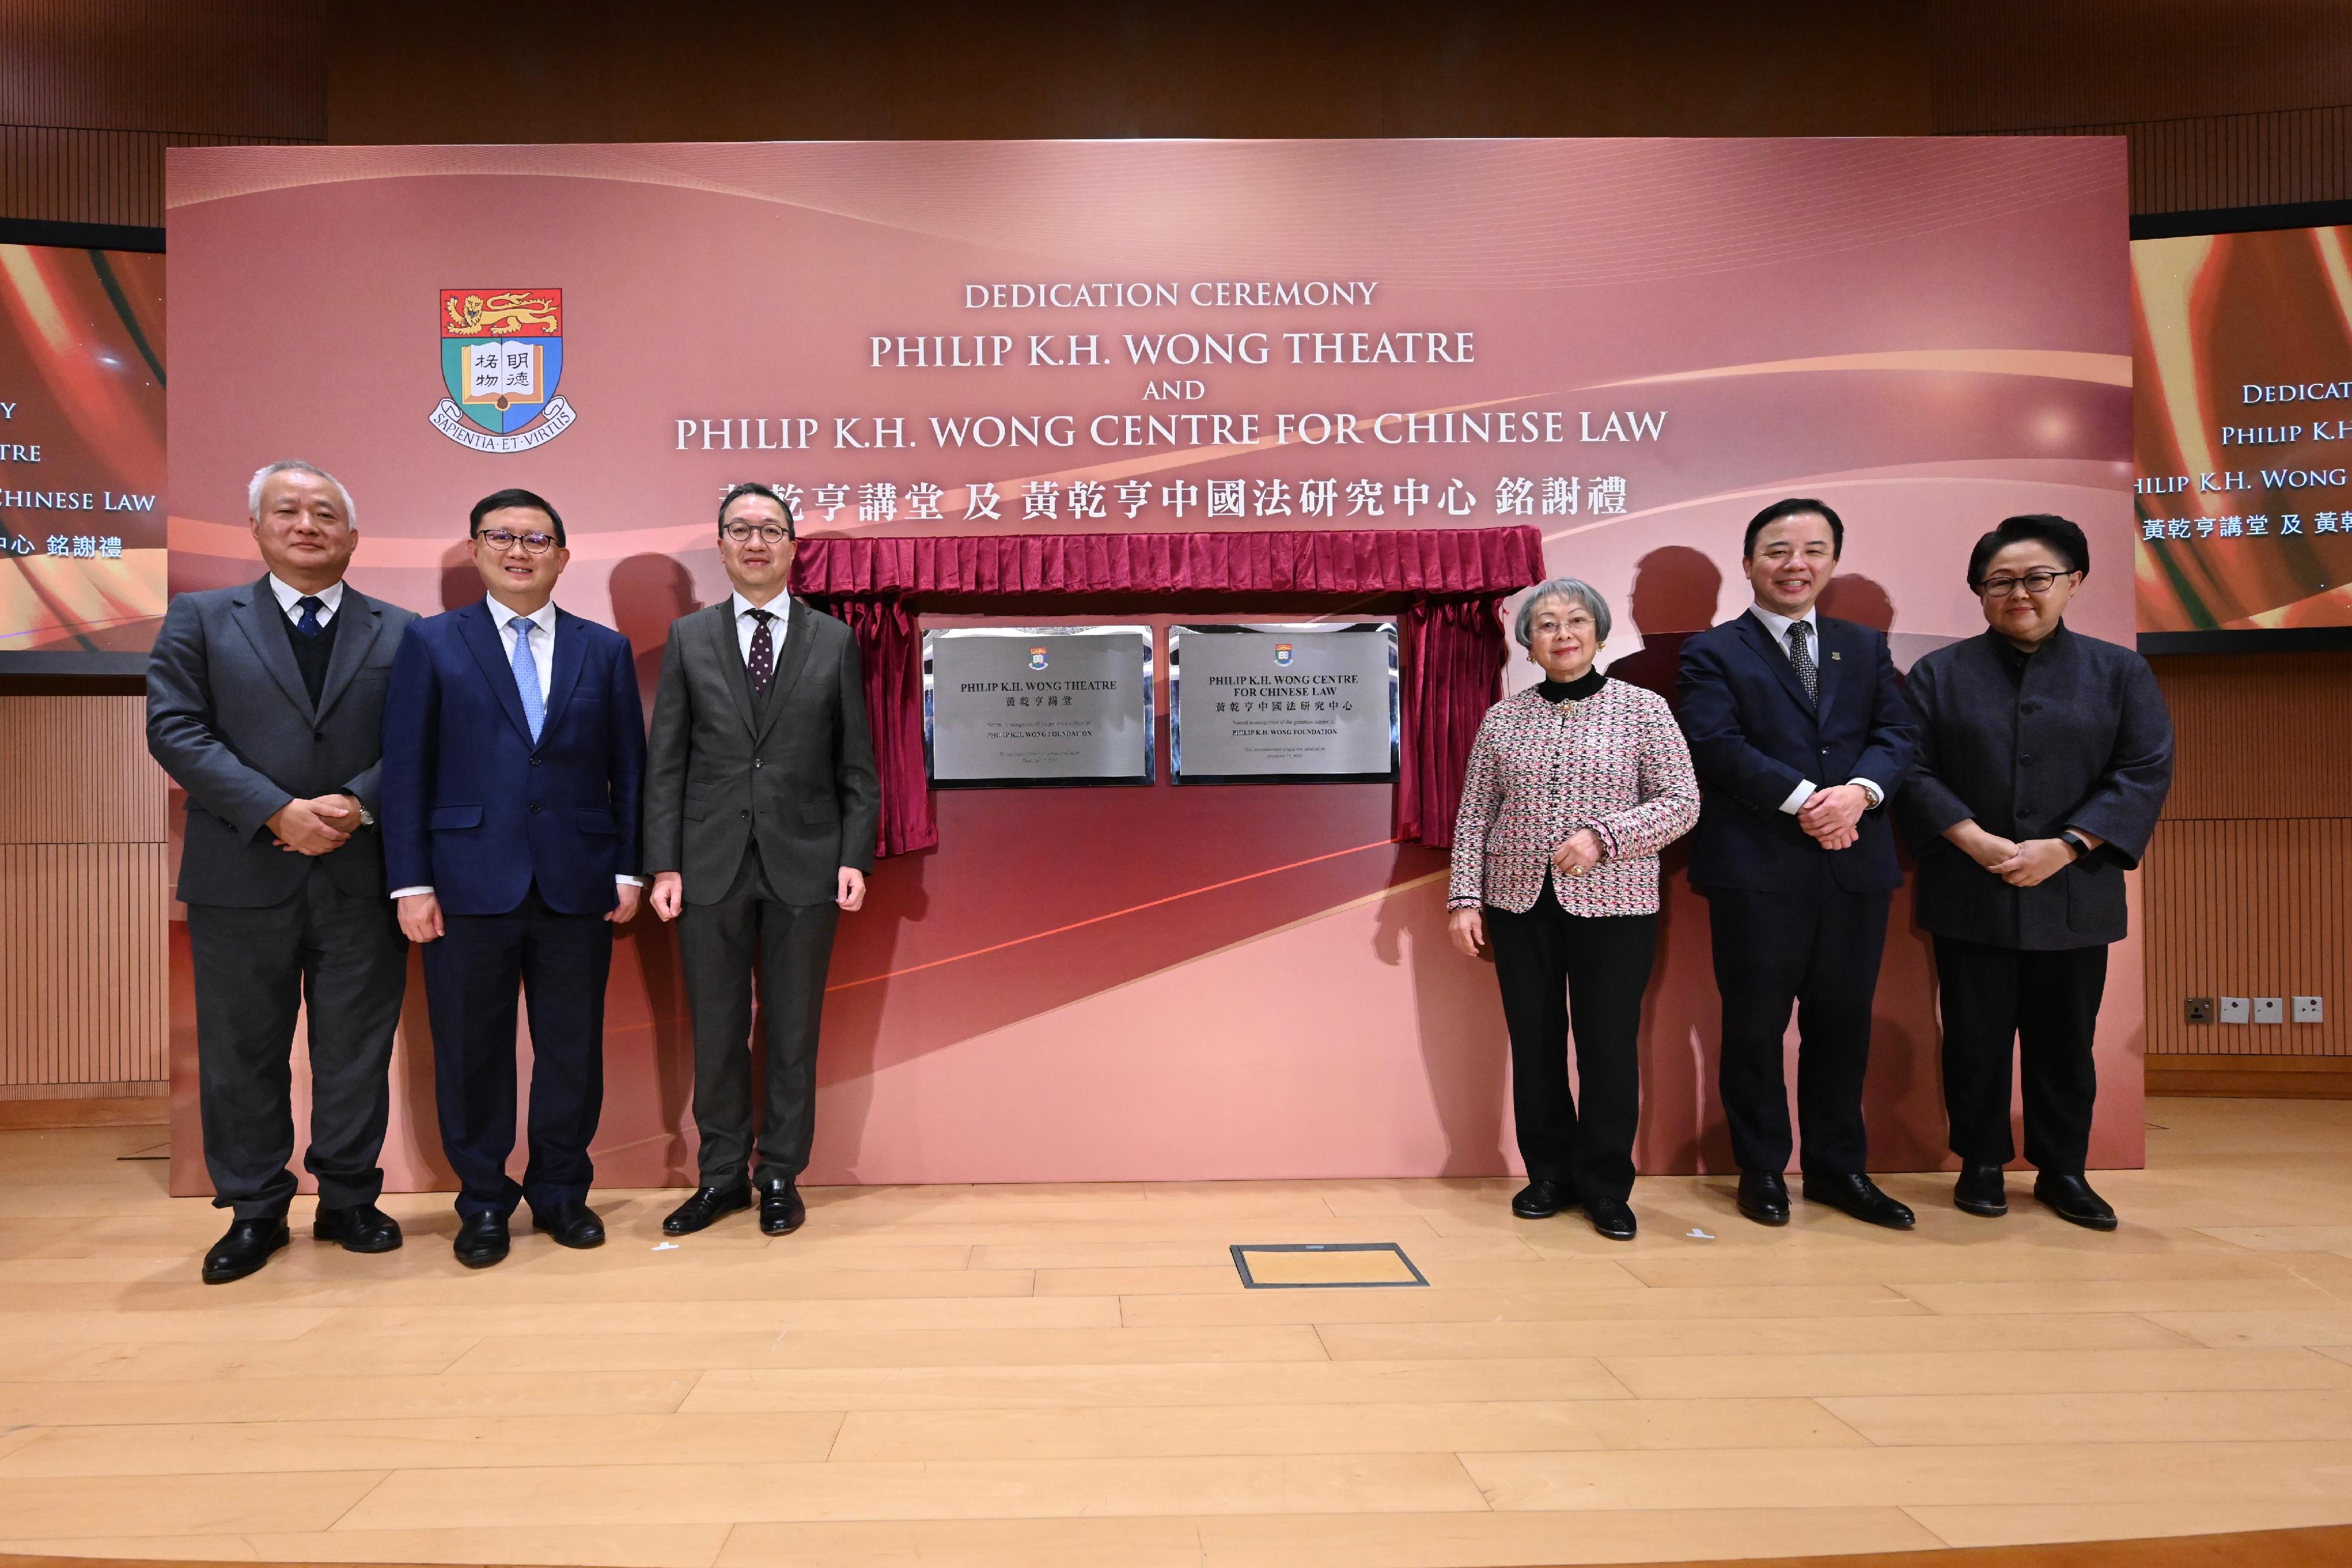 The Secretary for Justice, Mr Paul Lam, SC, spoke at the Dedication Ceremony for the Philip K H Wong Theatre and the Philip K H Wong Centre for Chinese Law at the University of Hong Kong (HKU) today (December 15), and officiated at the unveiling of plaques ceremony with other officiating guests. Photo shows Mr Lam (third left) and representatives of the Wong family Mrs Gertrude Wong (third right), Dr Kennedy Wong (second left) and Ms Ada Wong (first right), as well as the President and Vice-Chancellor of HKU, Professor Zhang Xiang (second right), and the Dean of the HKU Faculty of Law, Professor Fu Hualing (first left), pictured at the ceremony.

